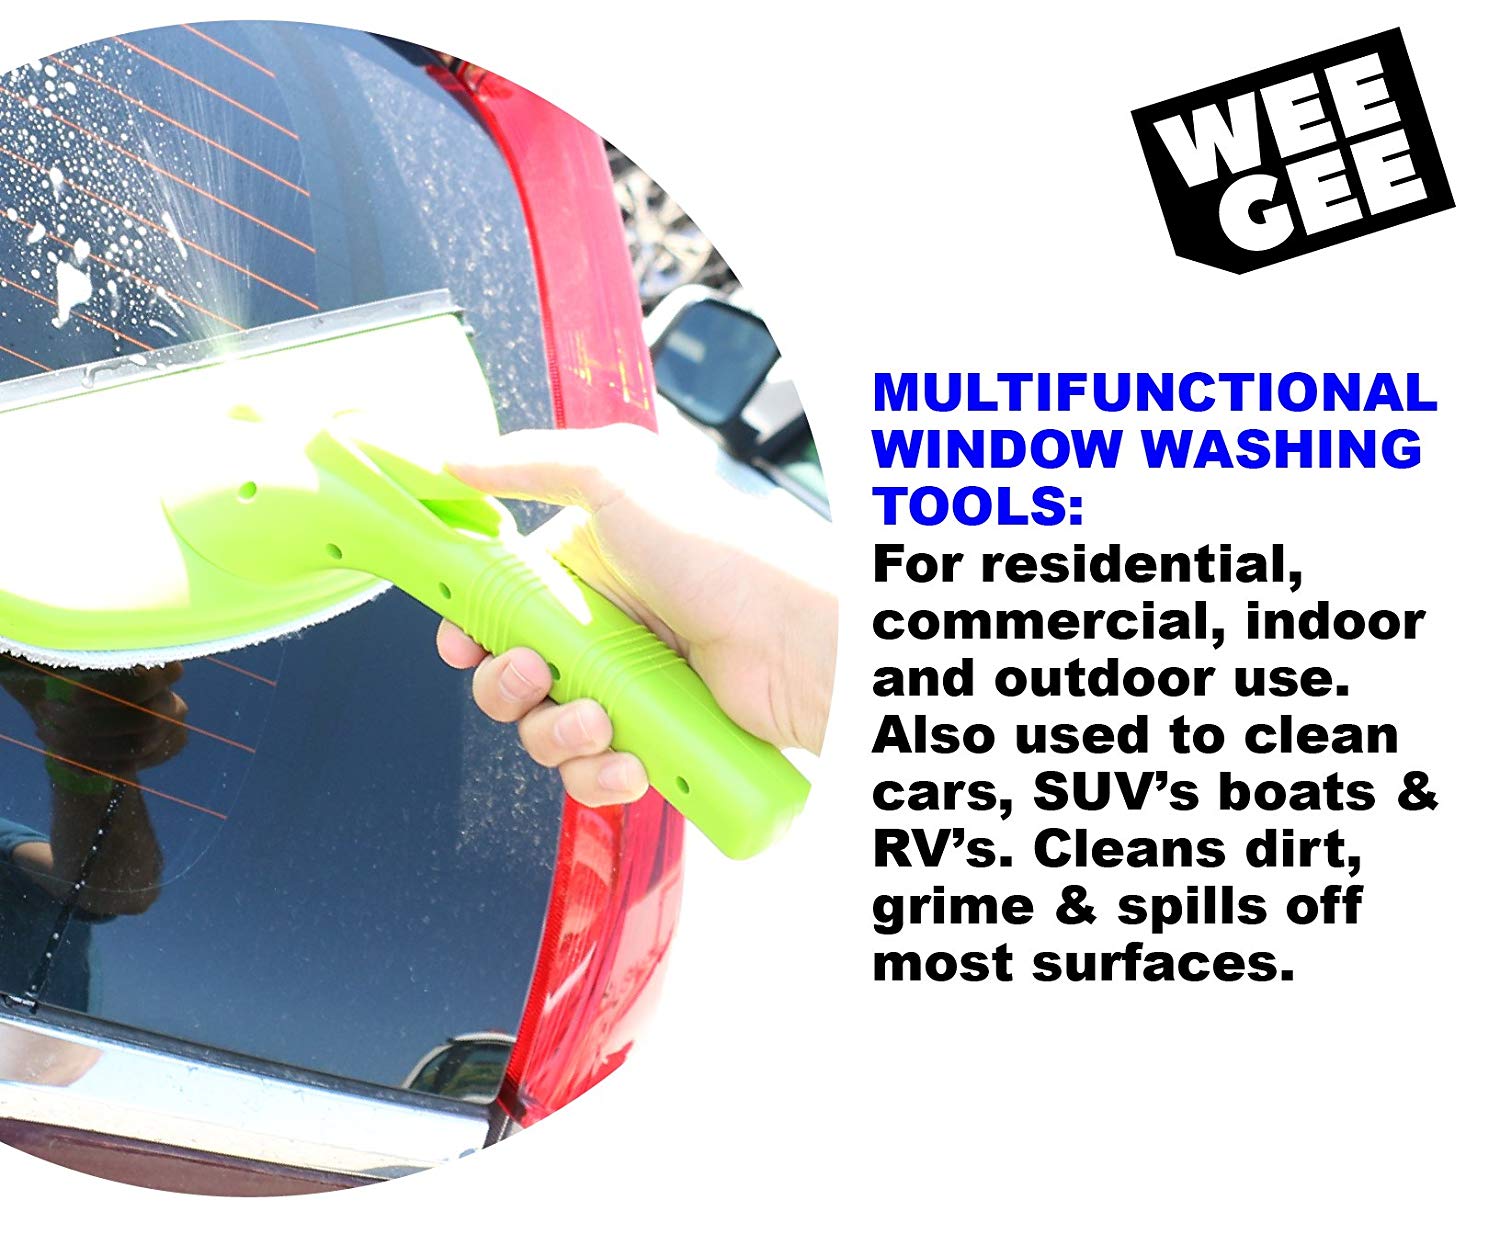 3-in-1 Car Window Squeegee with Glass Cleaner Spray, Wipe, and Scraper - Effortlessly Clean Mirrors, Screens, and Bathroom Surfaces - Bathroom